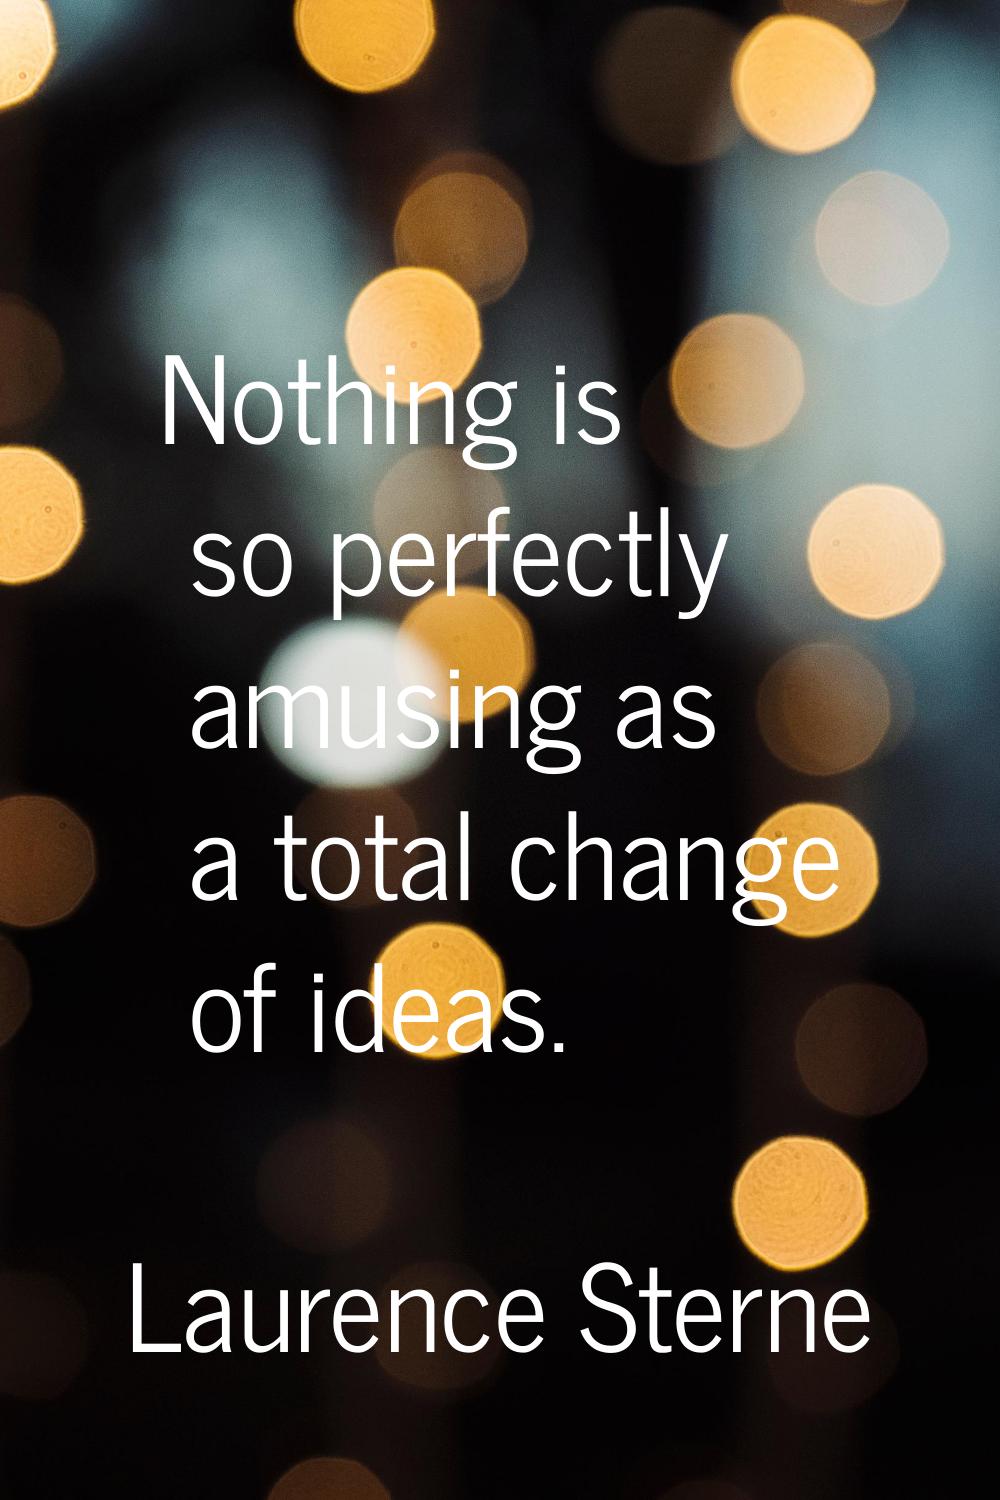 Nothing is so perfectly amusing as a total change of ideas.